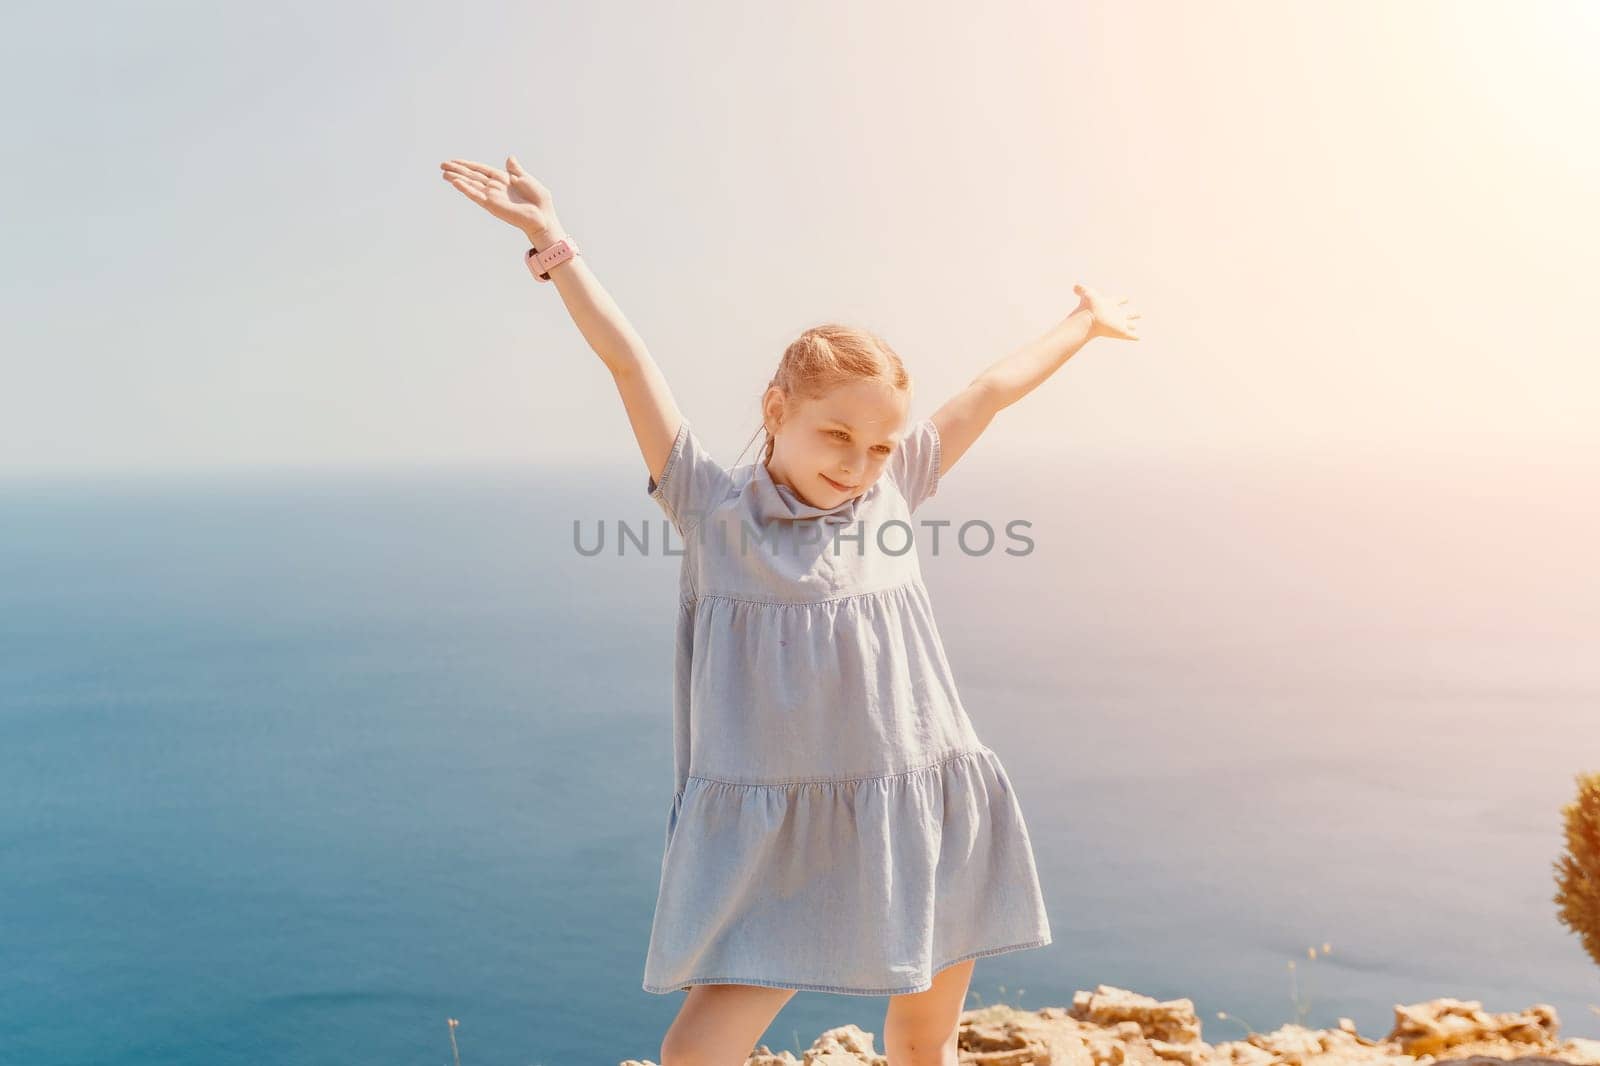 A young girl is standing on a beach, wearing a blue dress and holding her arms up in the air. Concept of joy and freedom, as the girl appears to be enjoying her time by the ocean. by panophotograph